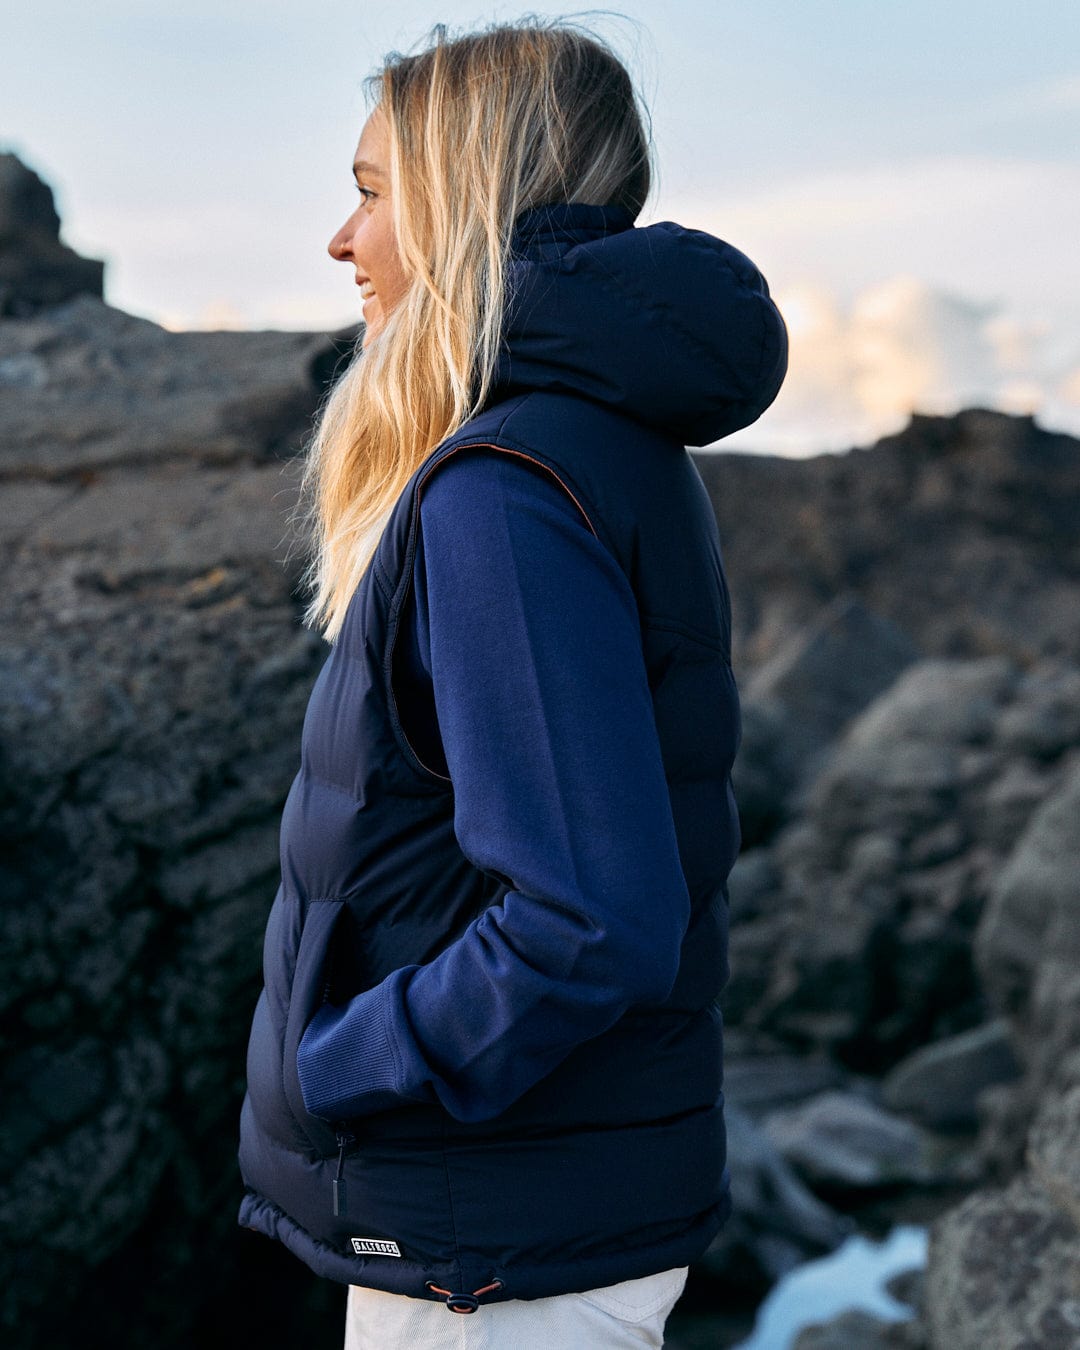 A woman wearing a blue puffer vest, the Saltrock Astra - Womens Reversible Padded Gilet - Blue/Pink, standing on rocks.